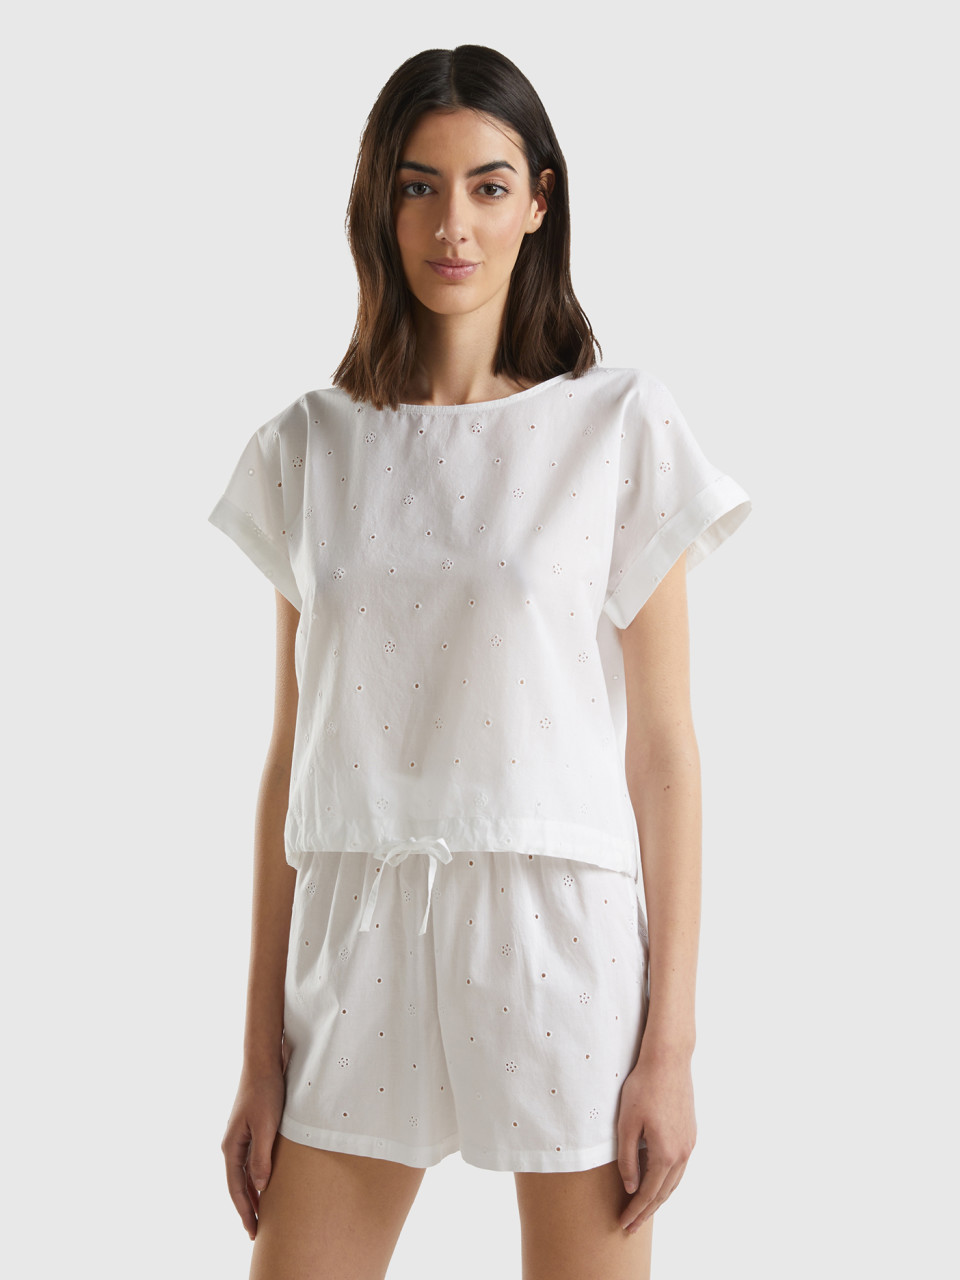 Benetton, Top With Broderie Anglaise, White, Women